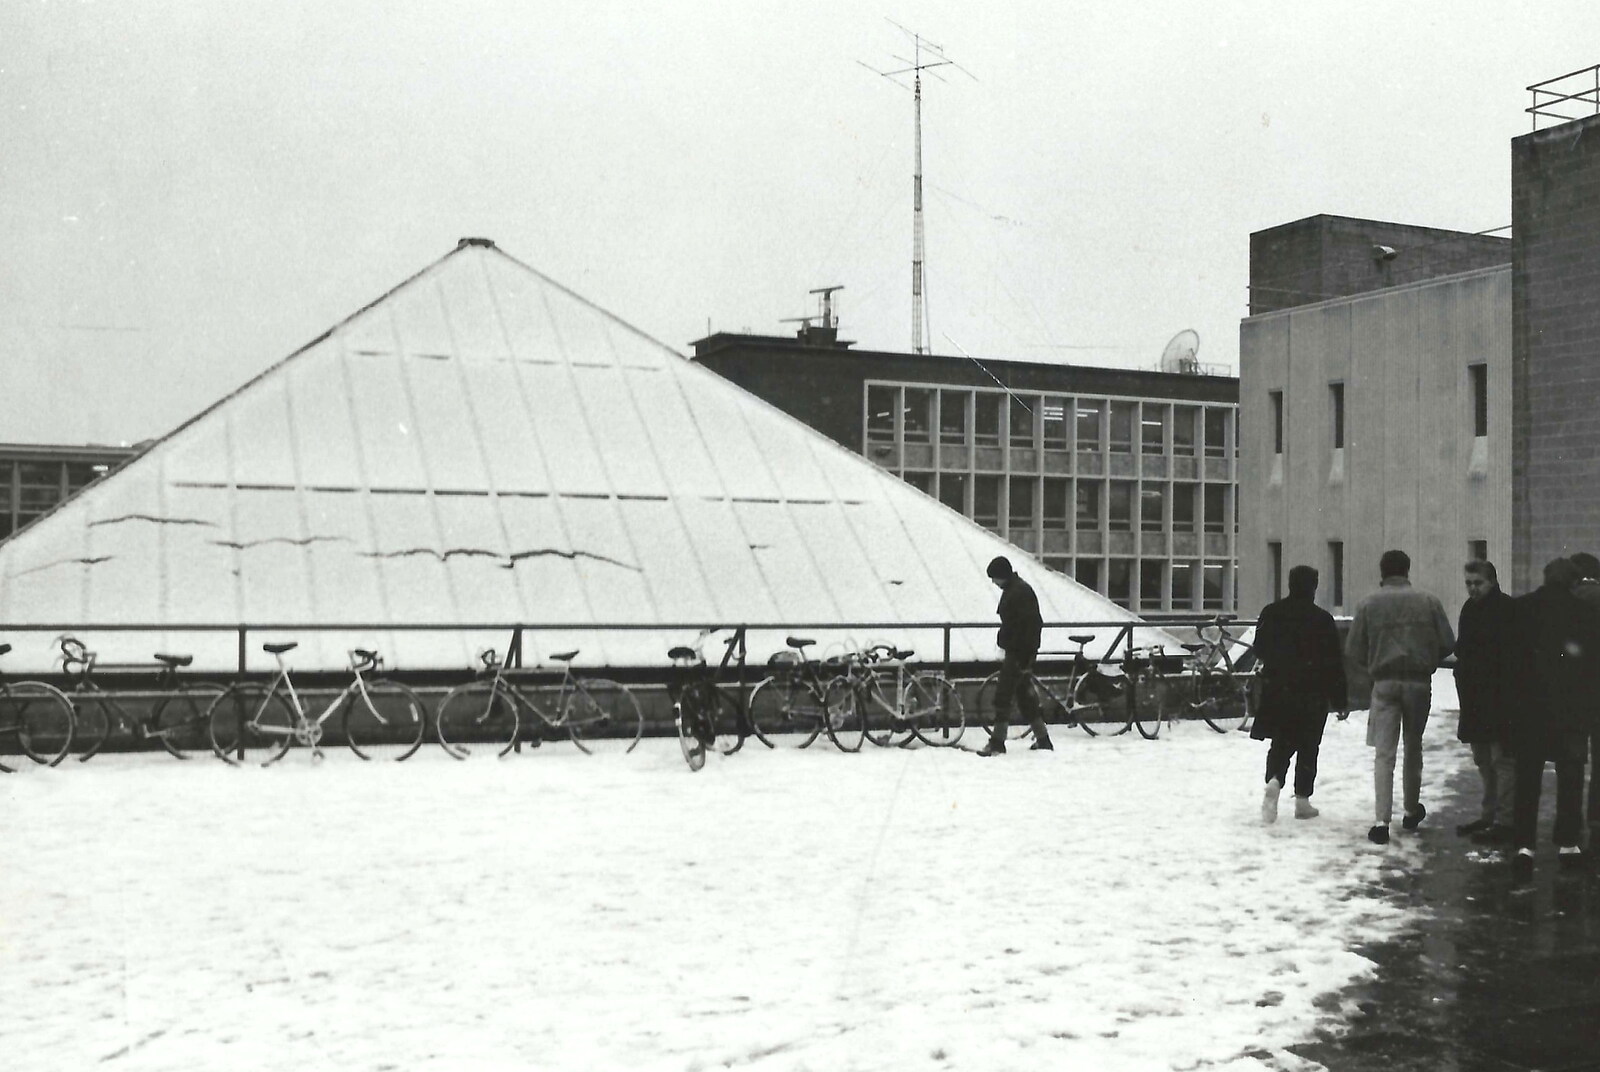 The Students' Union Pyramid in the snow from Uni: The Fly Christmas Party and BABS Panto, Plymouth Polytechnic, Devon - December 11th 1985